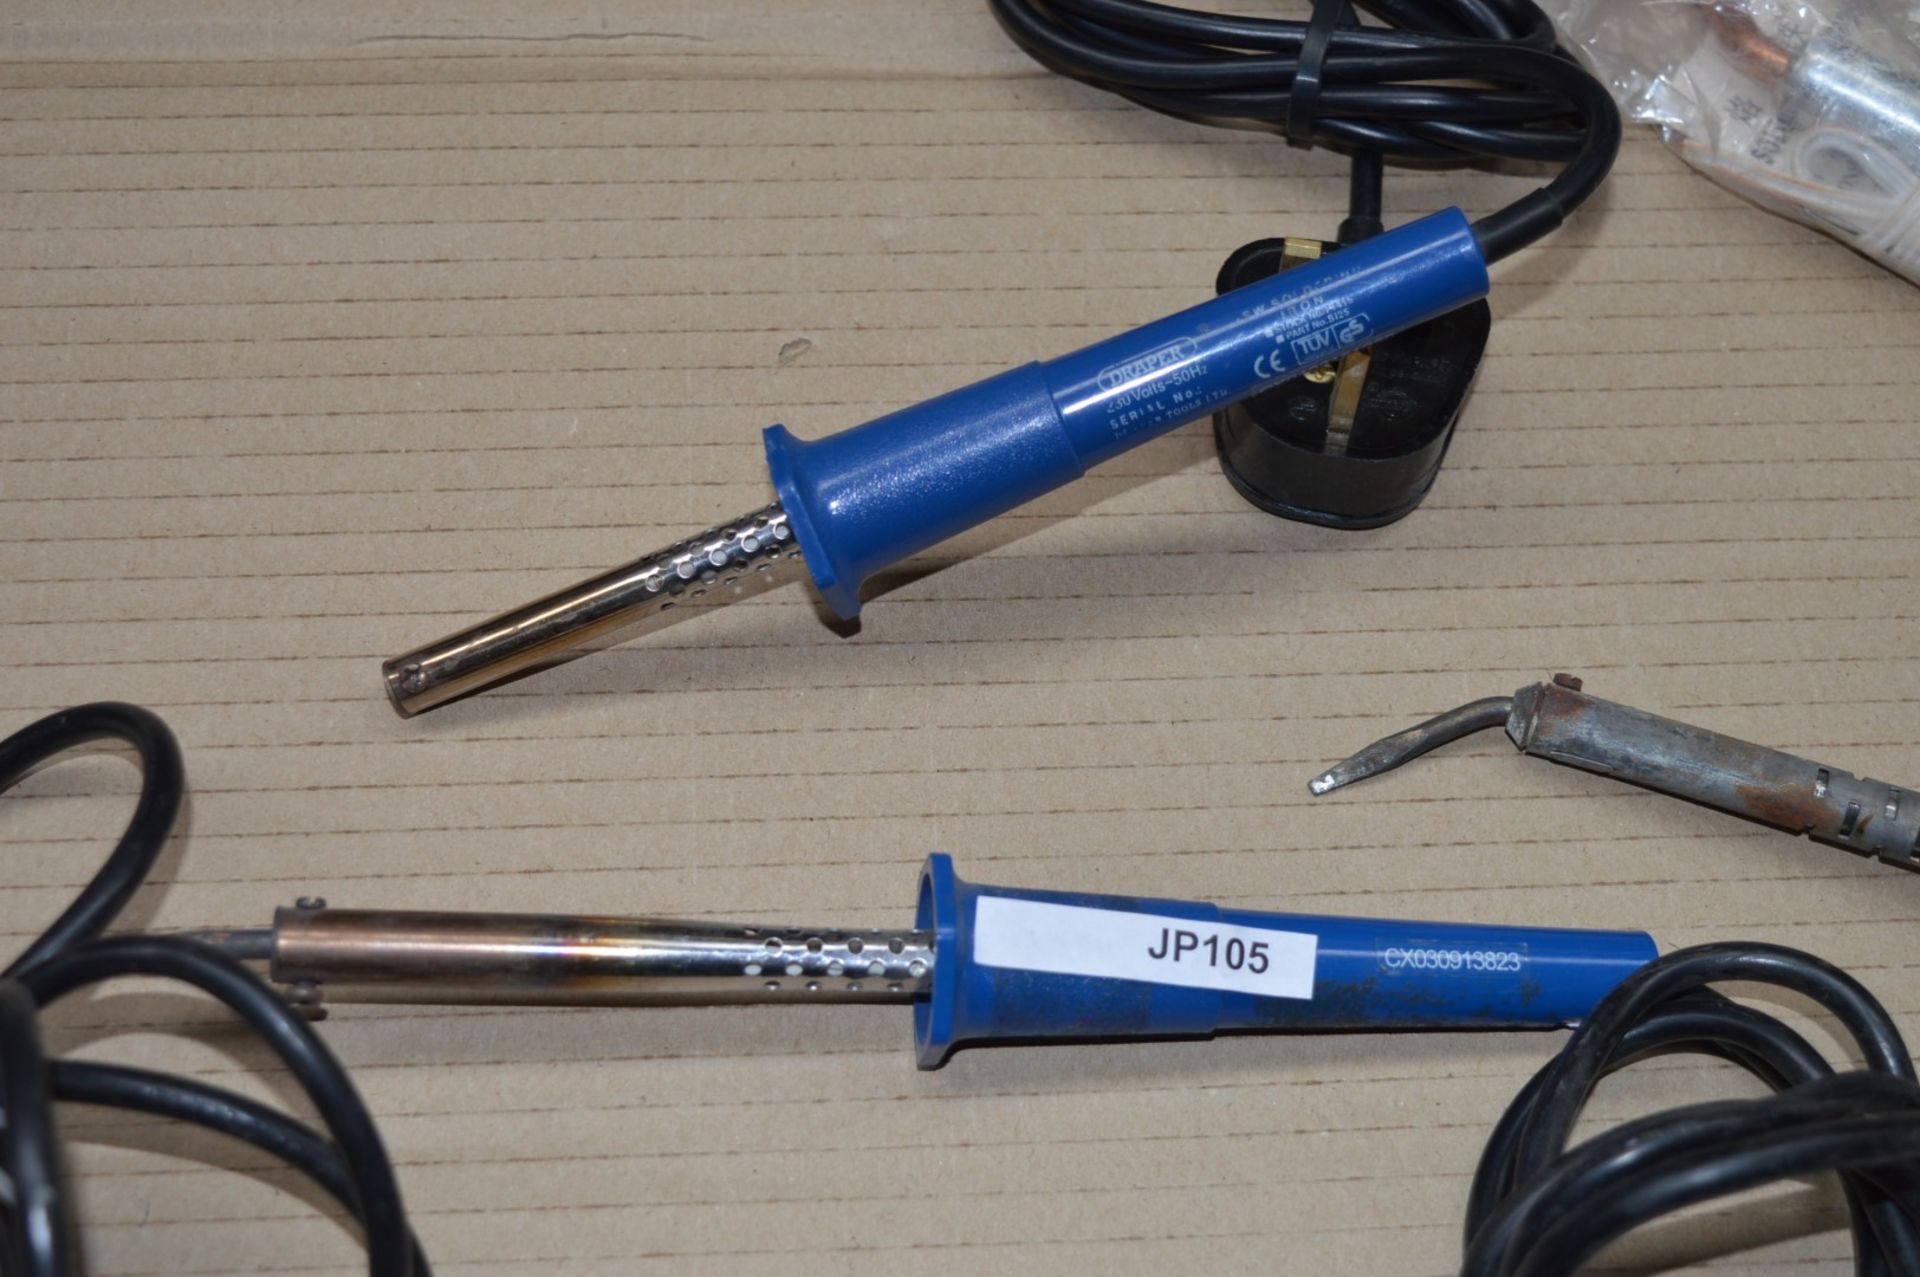 6 x Various 240v Soldering Irons - Brands Include Weller and Draper - CL300 - Ref JP105 - - Image 3 of 22